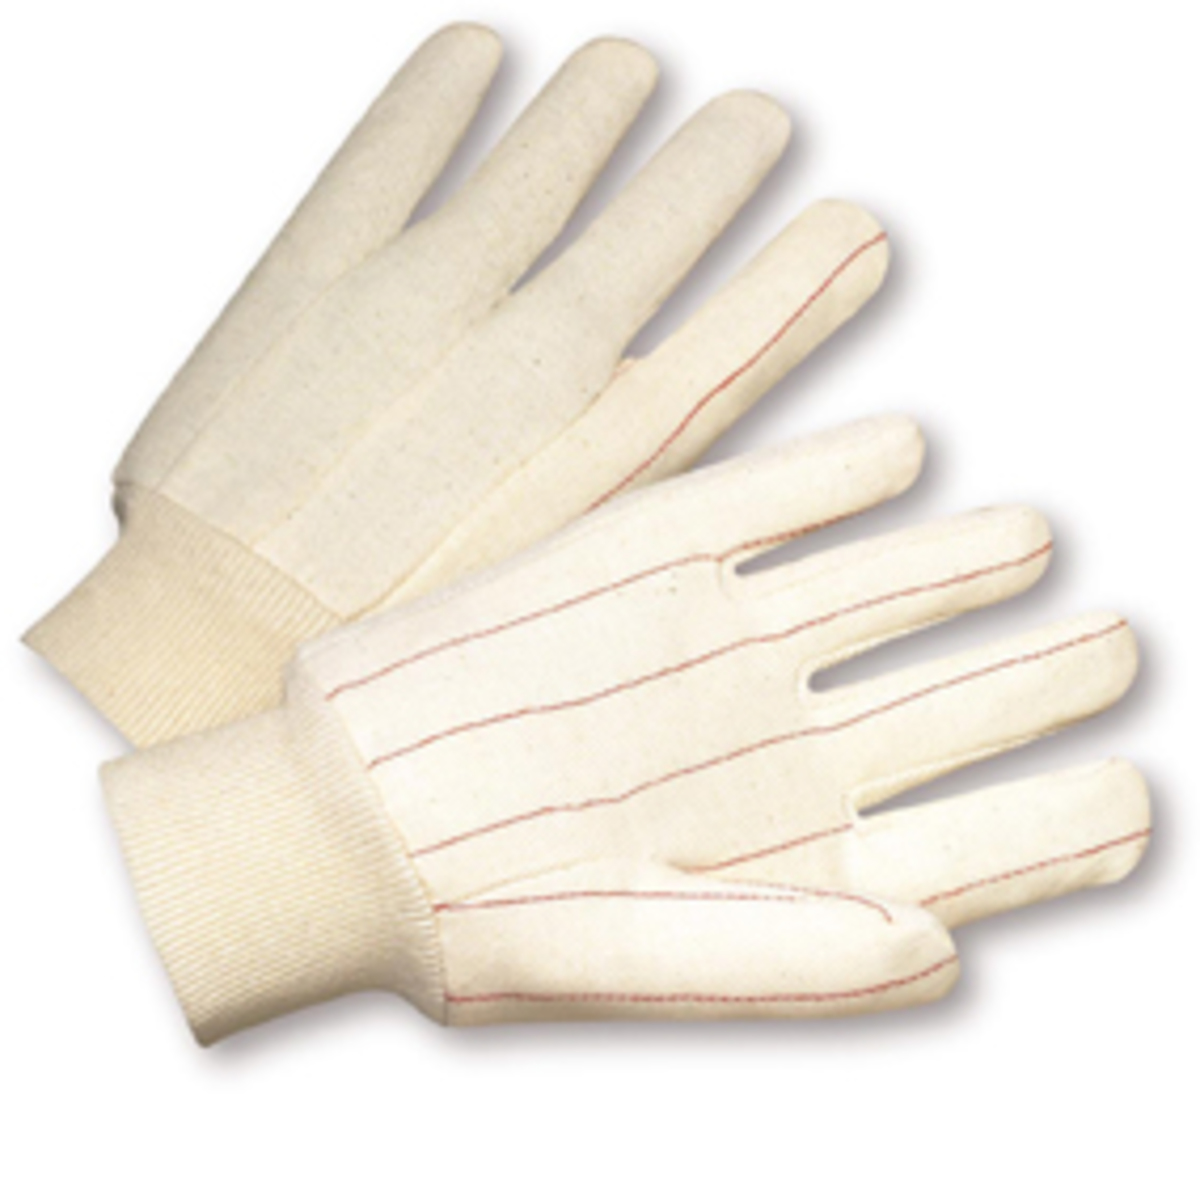 PIP® Ladies Natural Light Weight Cotton Hot Mill Gloves With Knit Wrist